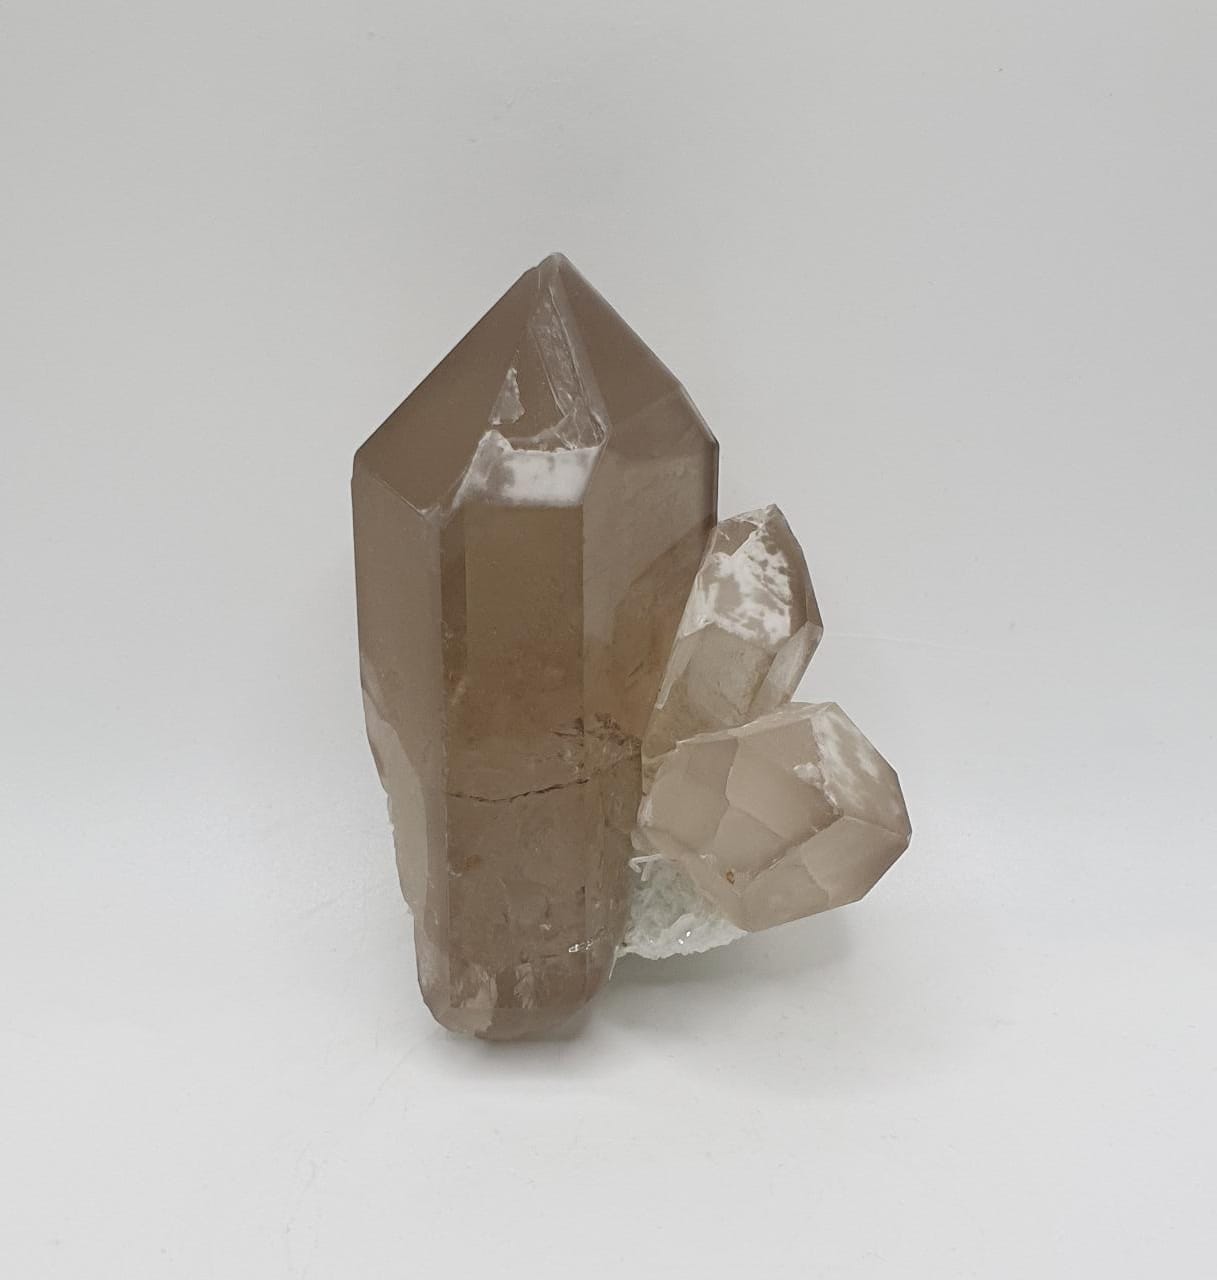 Lovely Smokey Quartz with Perfect Secondary Crystals and Excellent Transparency